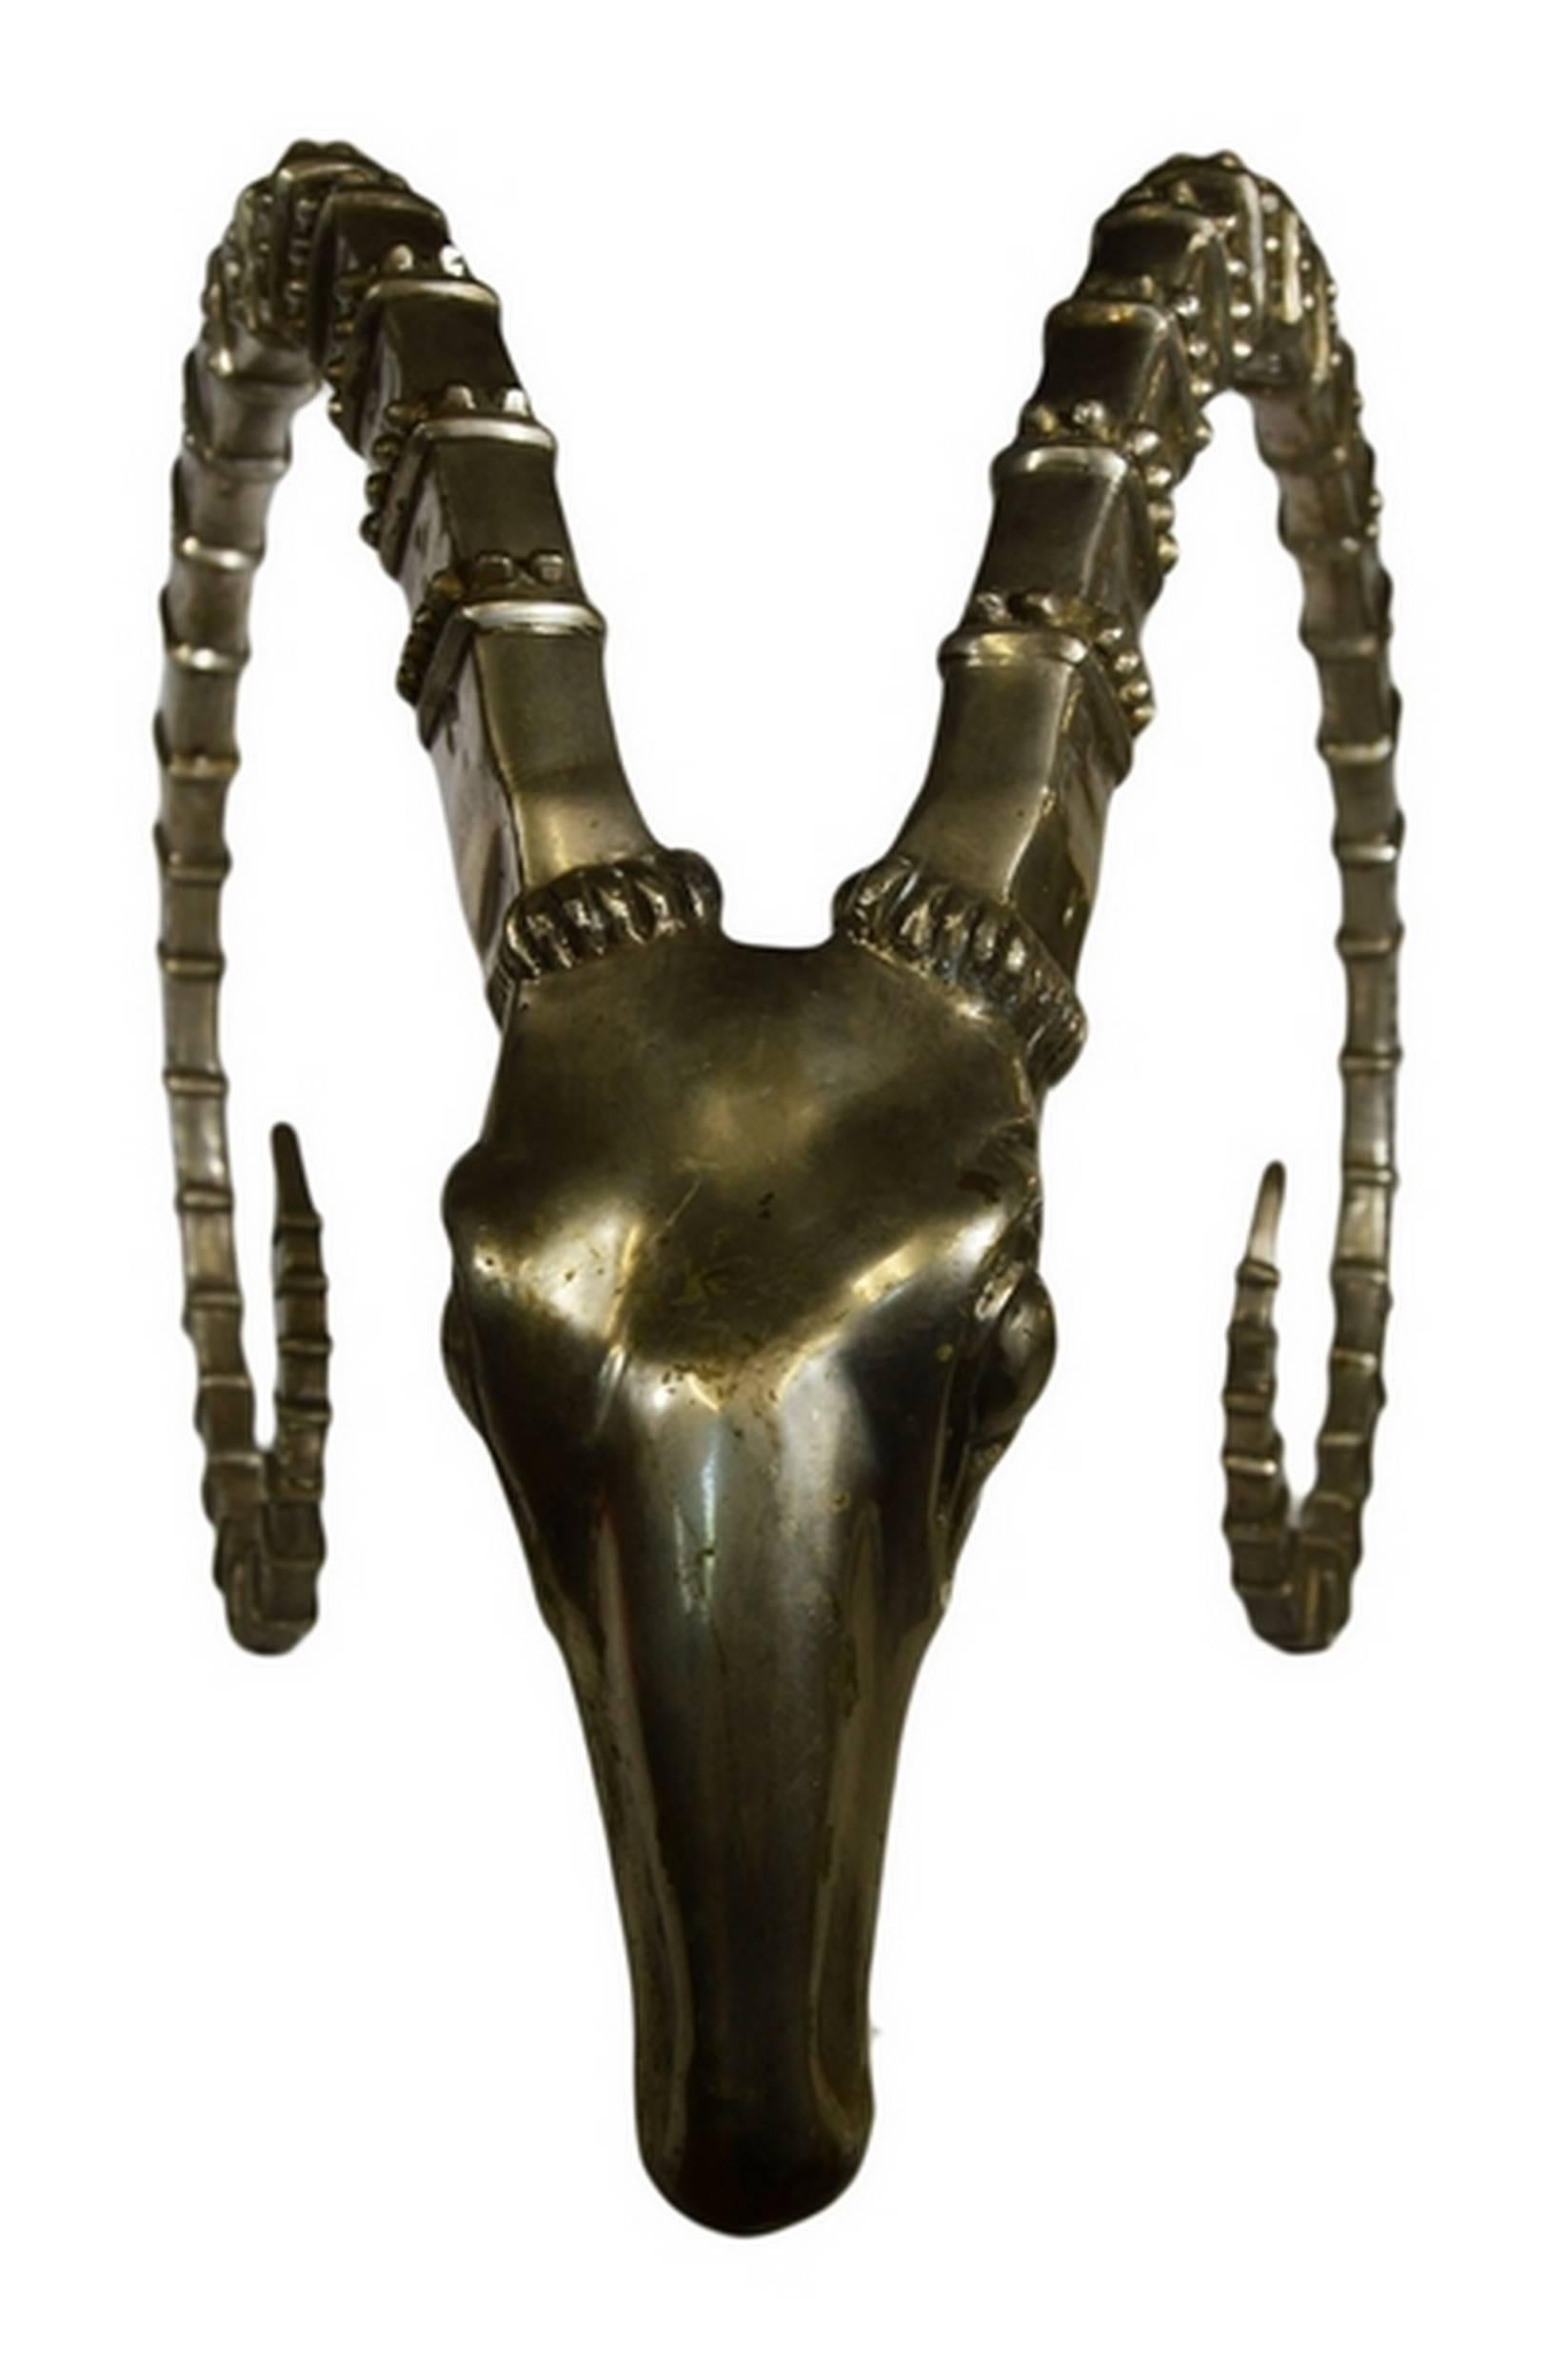 A slender silver plated bronze antelope head sculpture from Thailand, featuring a detailed appearance from the 20th century. This large antelope head features an elegant face with its thin spiral horns. This piece imitates a hunting trophy with a